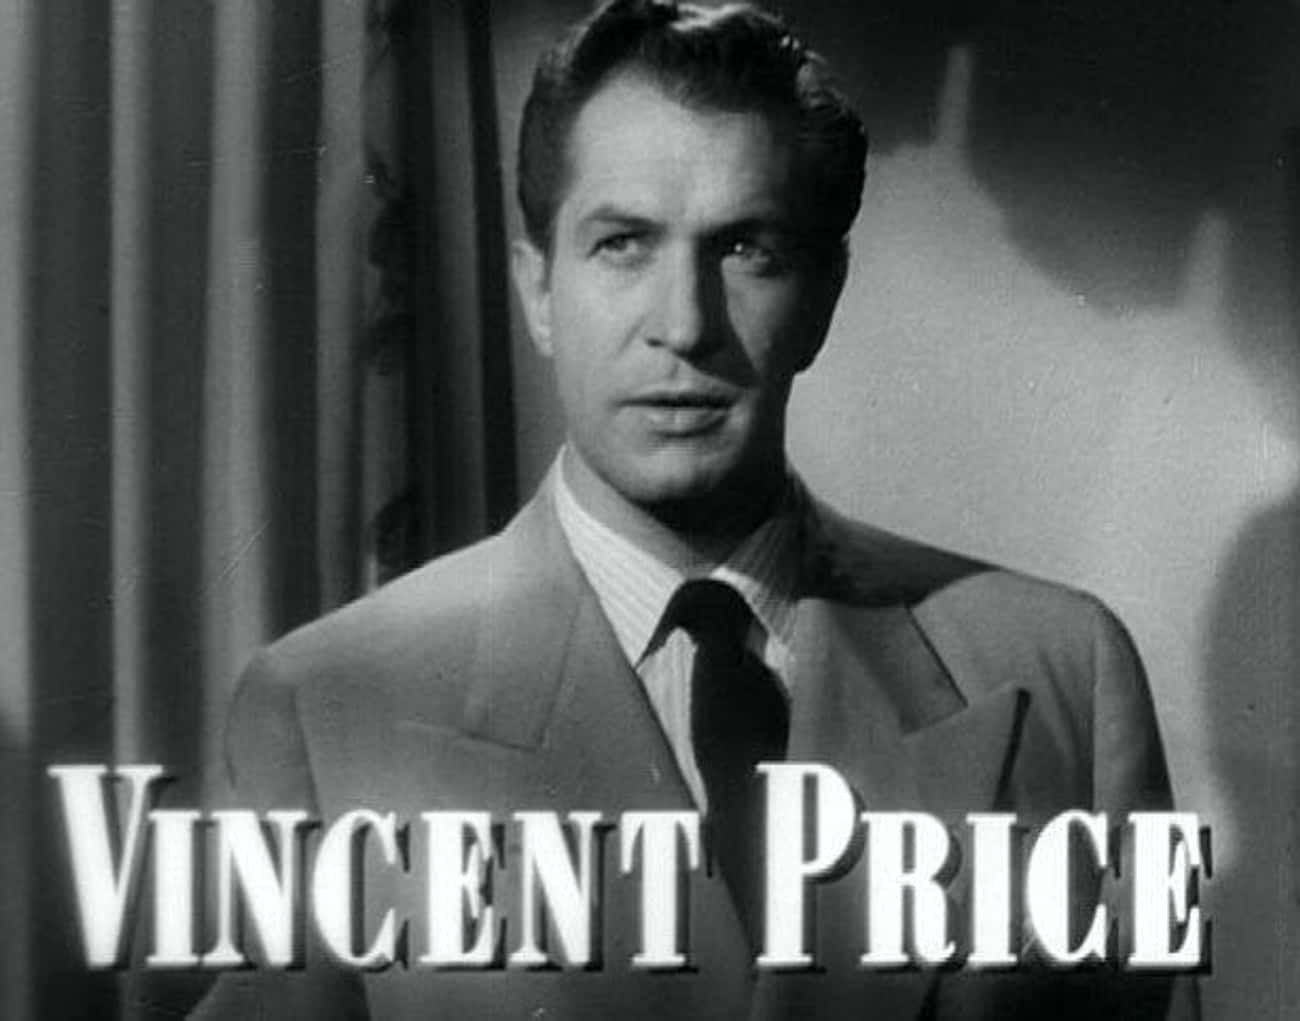 He Got To Cast Vincent Price, A Childhood Idol